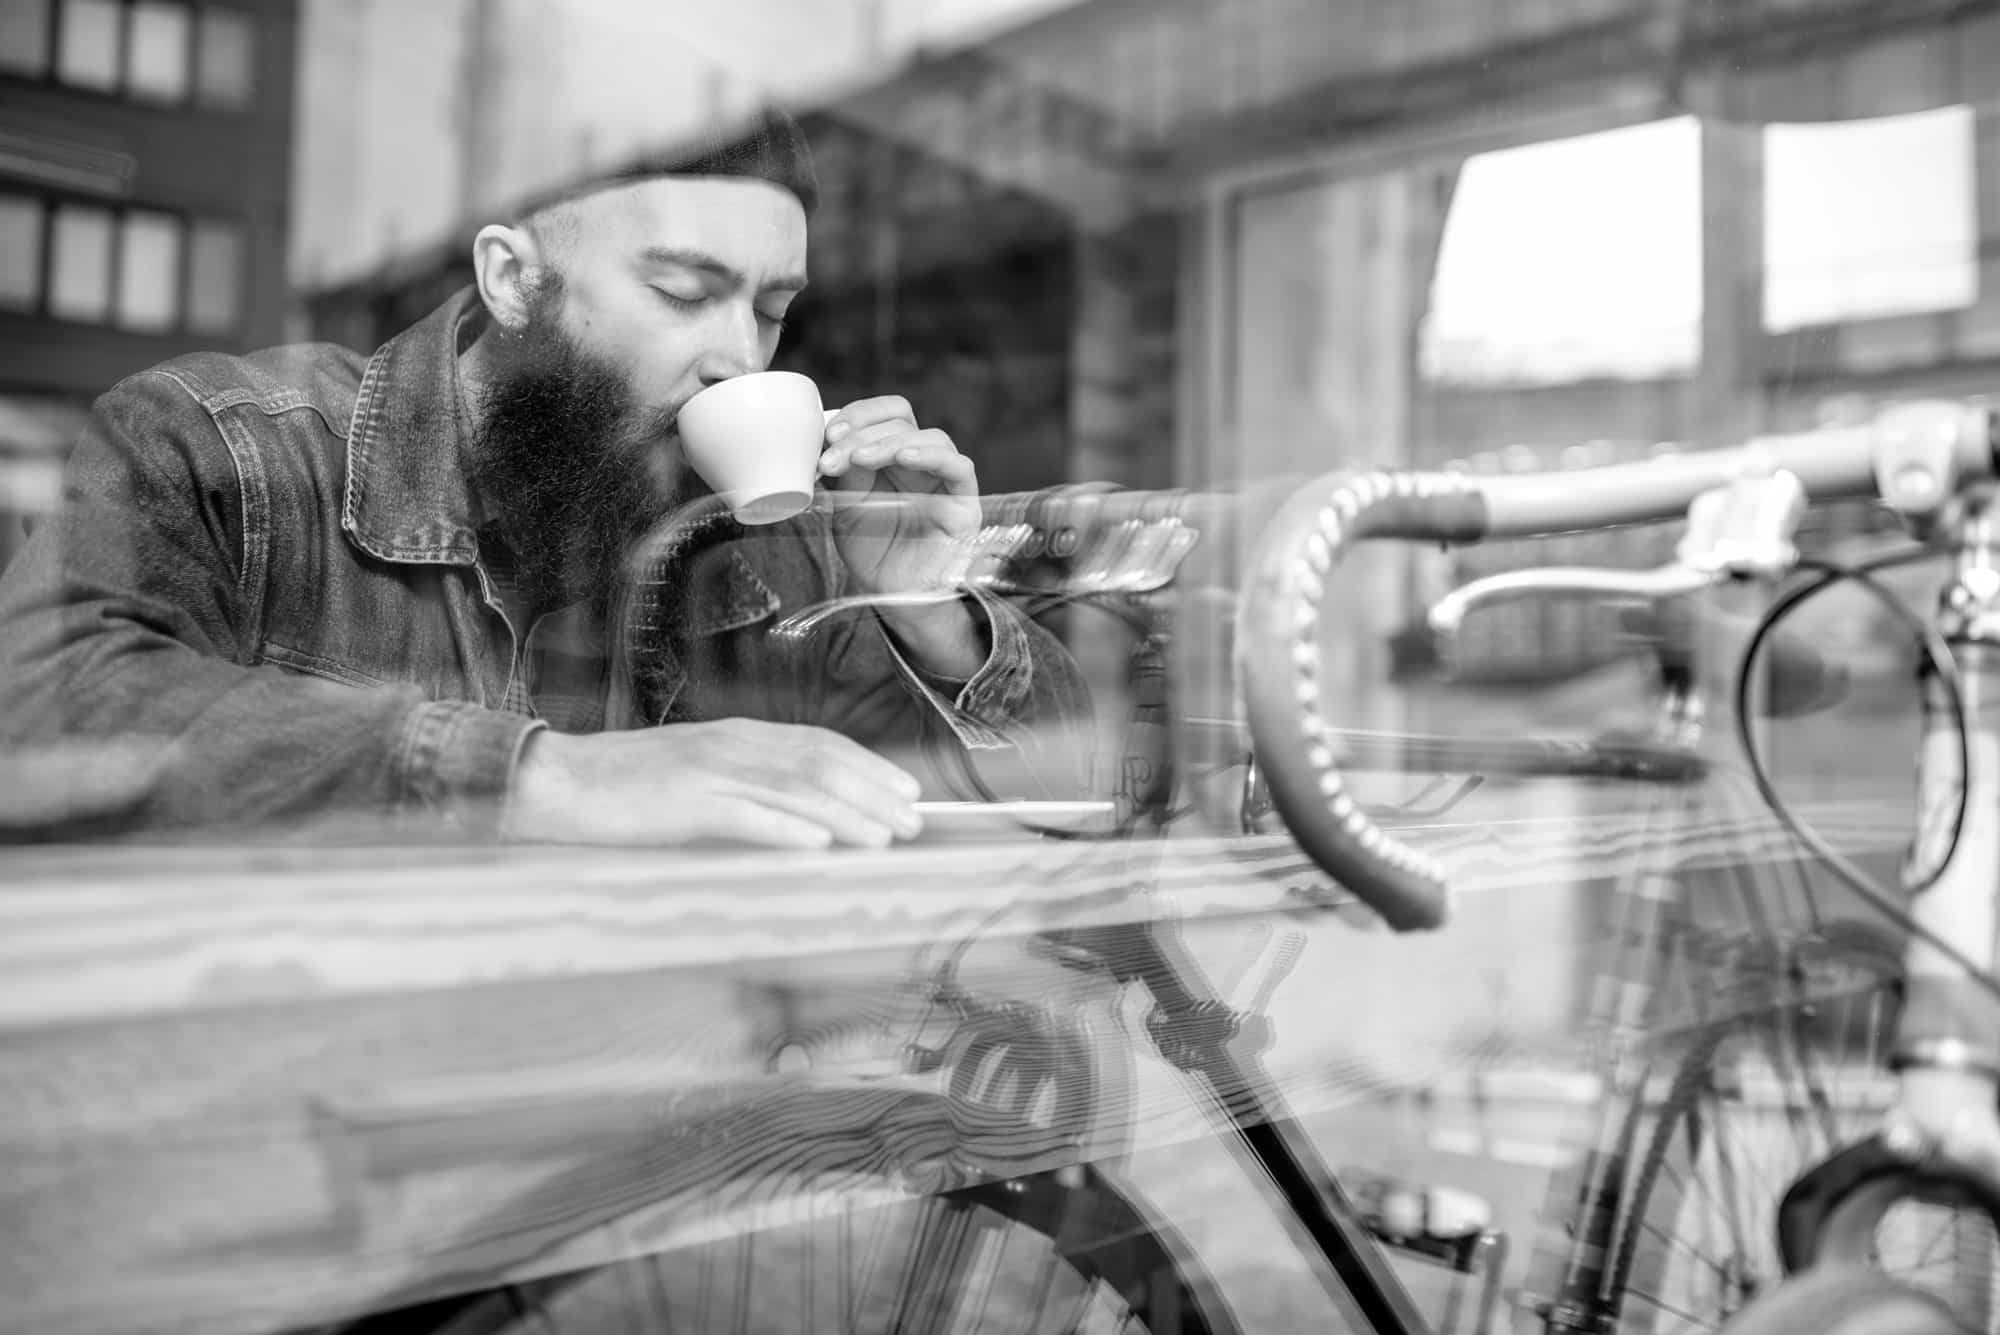 Person drinking coffee - bike - hipster - reused coffee grounds - reuse - recycle - sustainable - circular economy - circulatte - coffinery - zero waste - coffee based biorefinery - coffee waste streams - coffee oil - groundbreaking applications